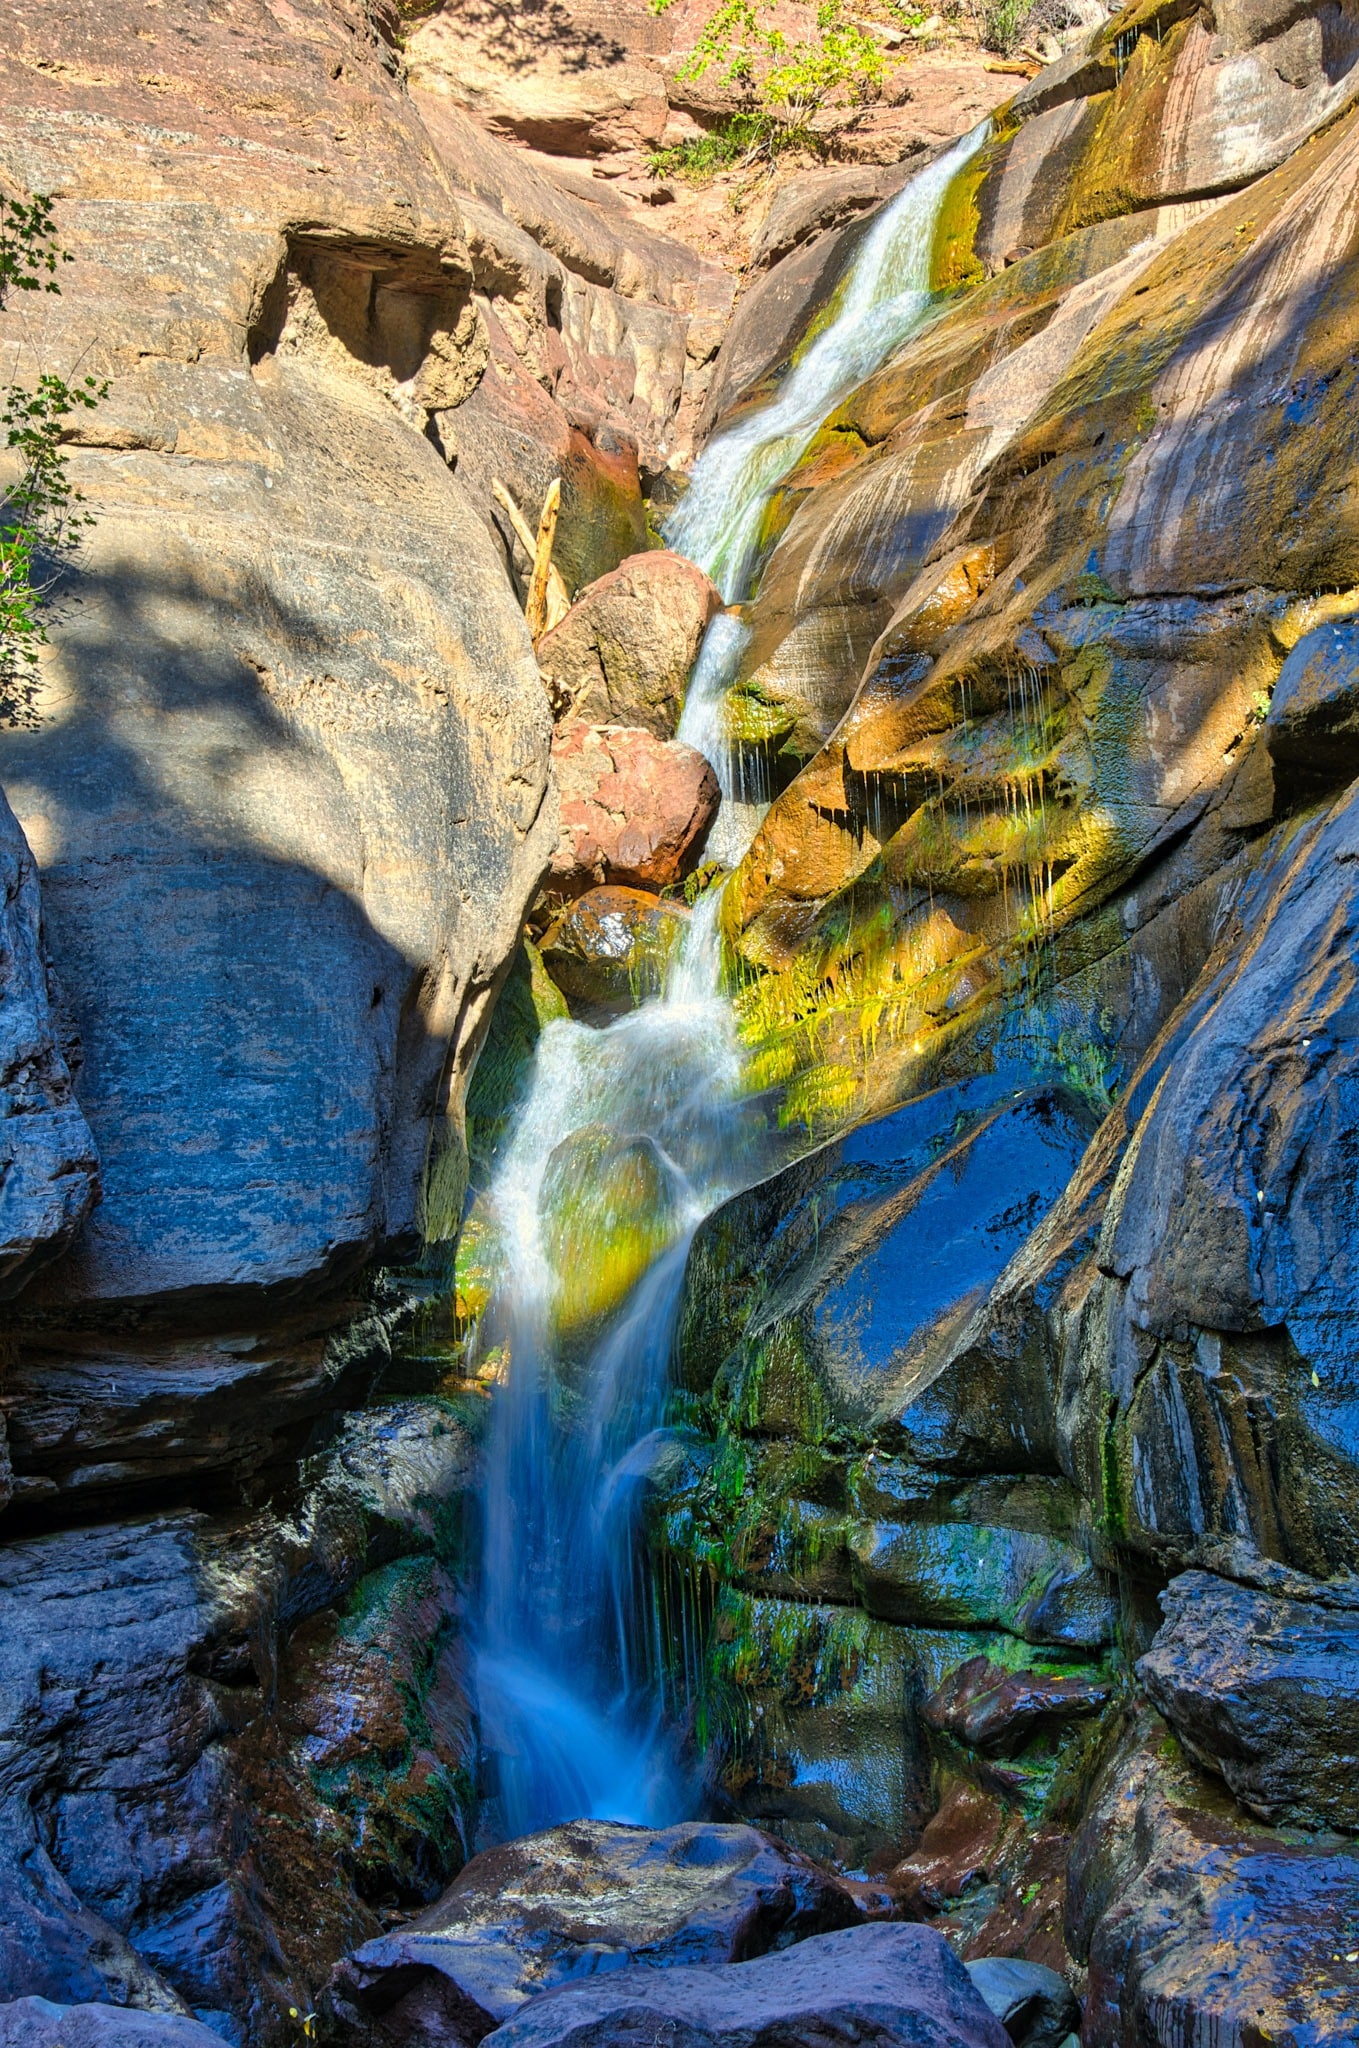 Hayes Creek Falls, off CO-133 near Redstone, Colorado, is especially colorful because of the variety of rocks and the wet mosses.